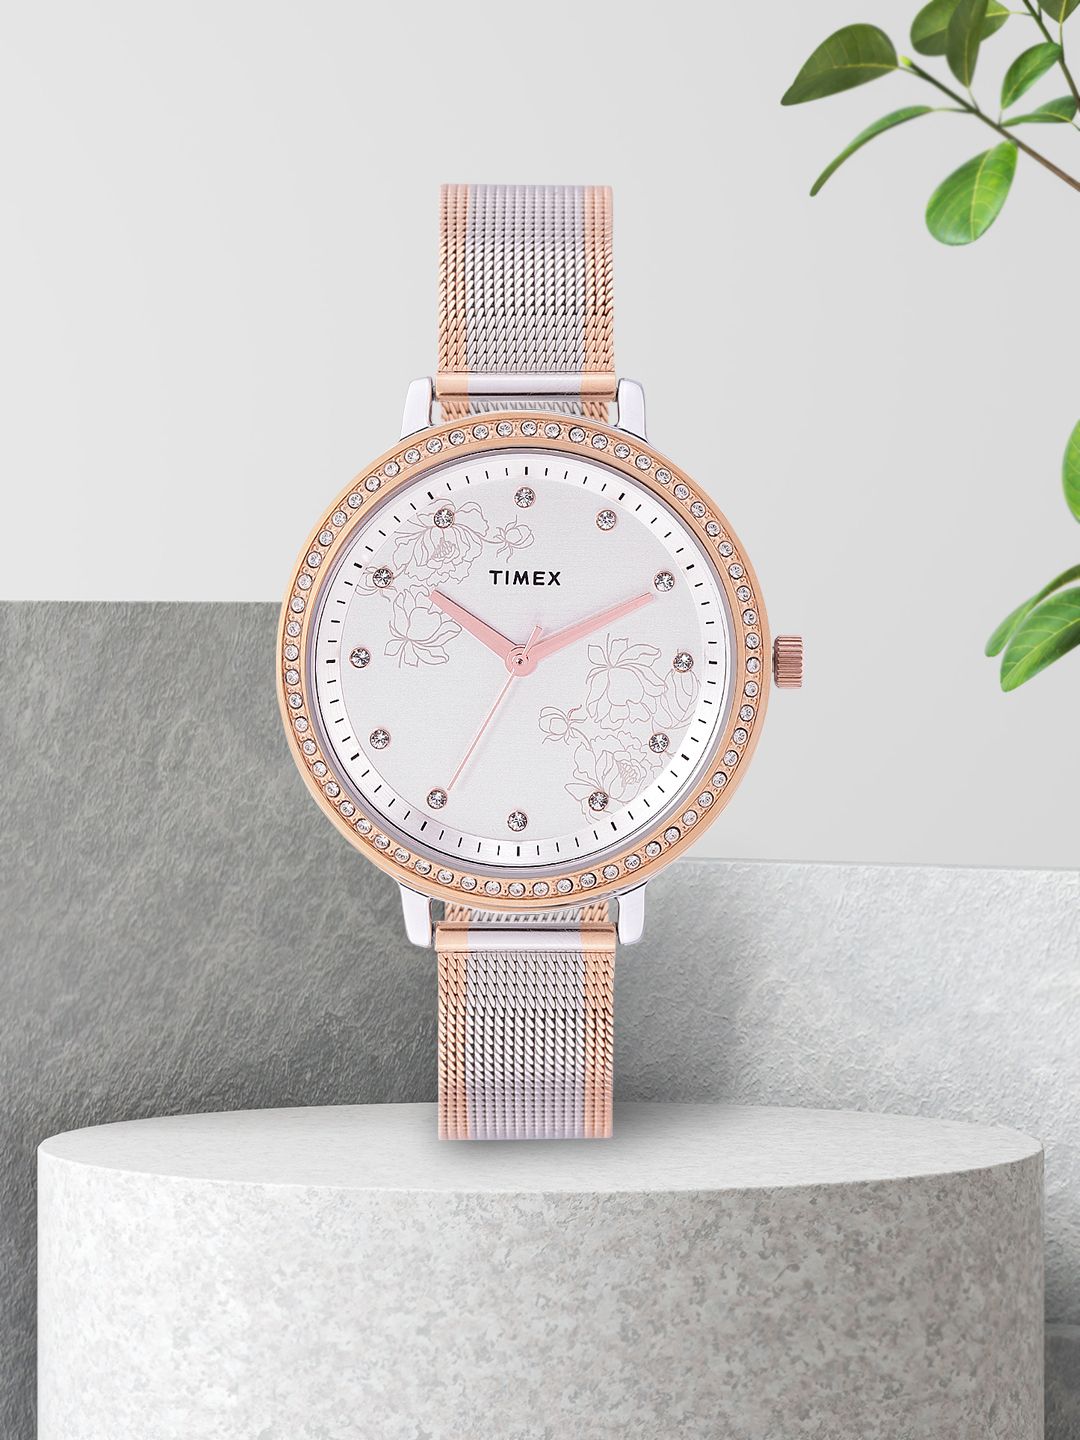 Timex Women Silver-Toned Analogue Watch - TWEL14703 Price in India